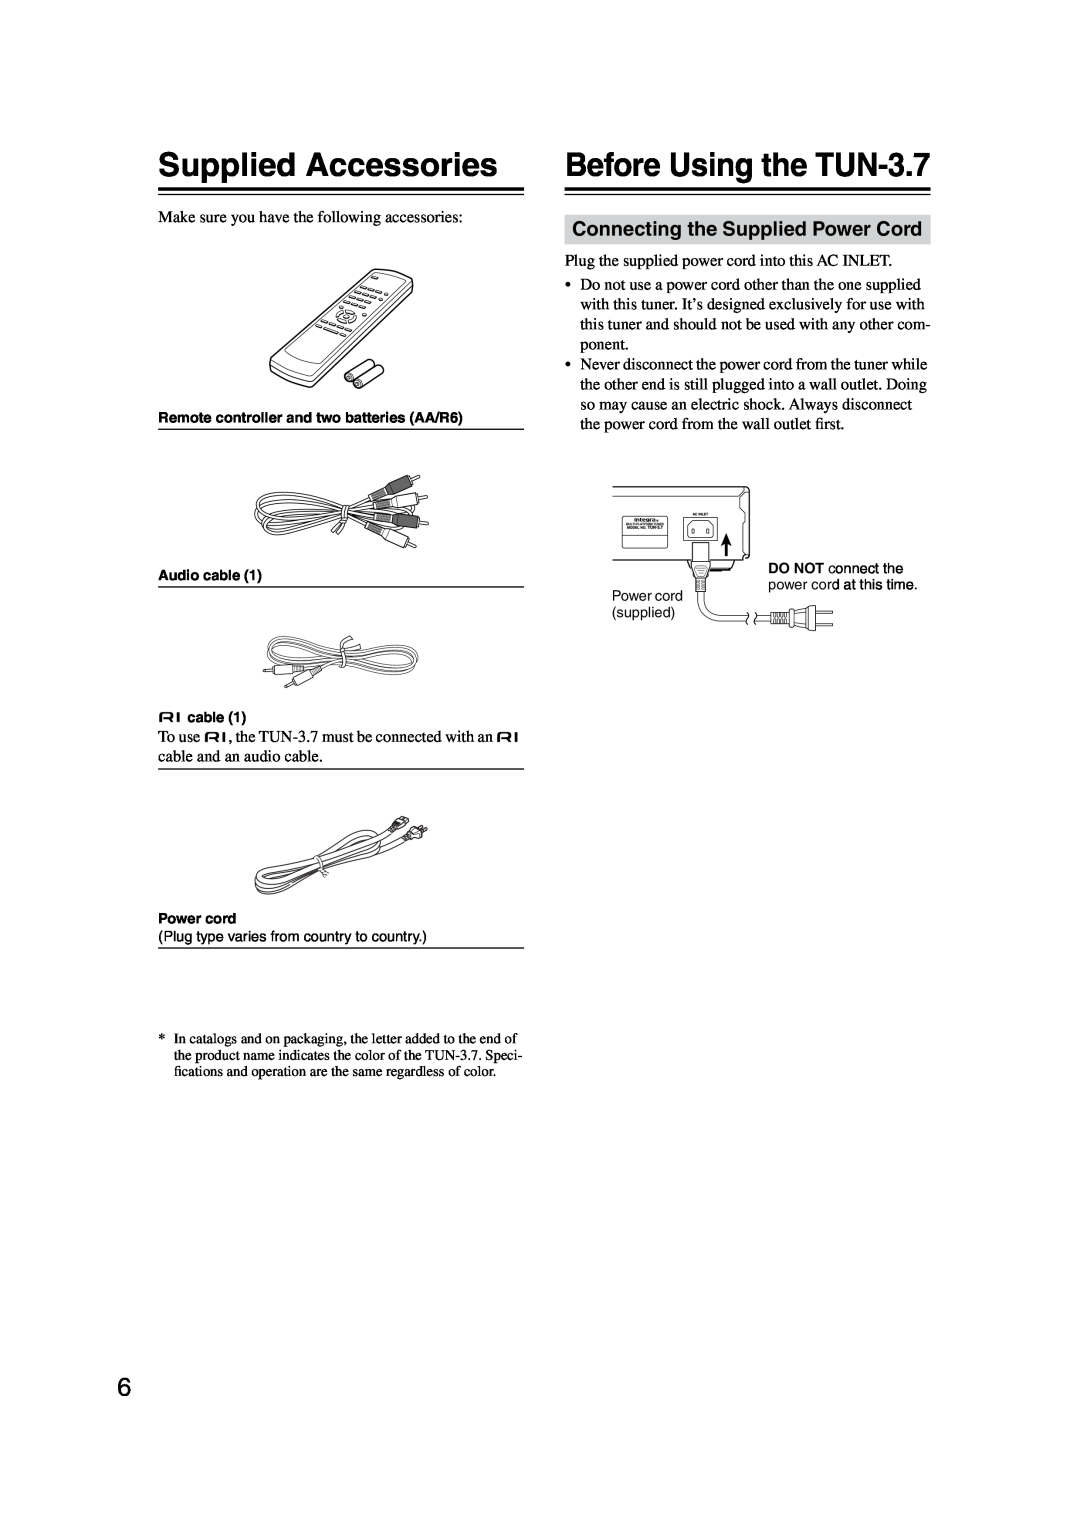 Integra instruction manual Supplied Accessories, Before Using the TUN-3.7, Connecting the Supplied Power Cord 